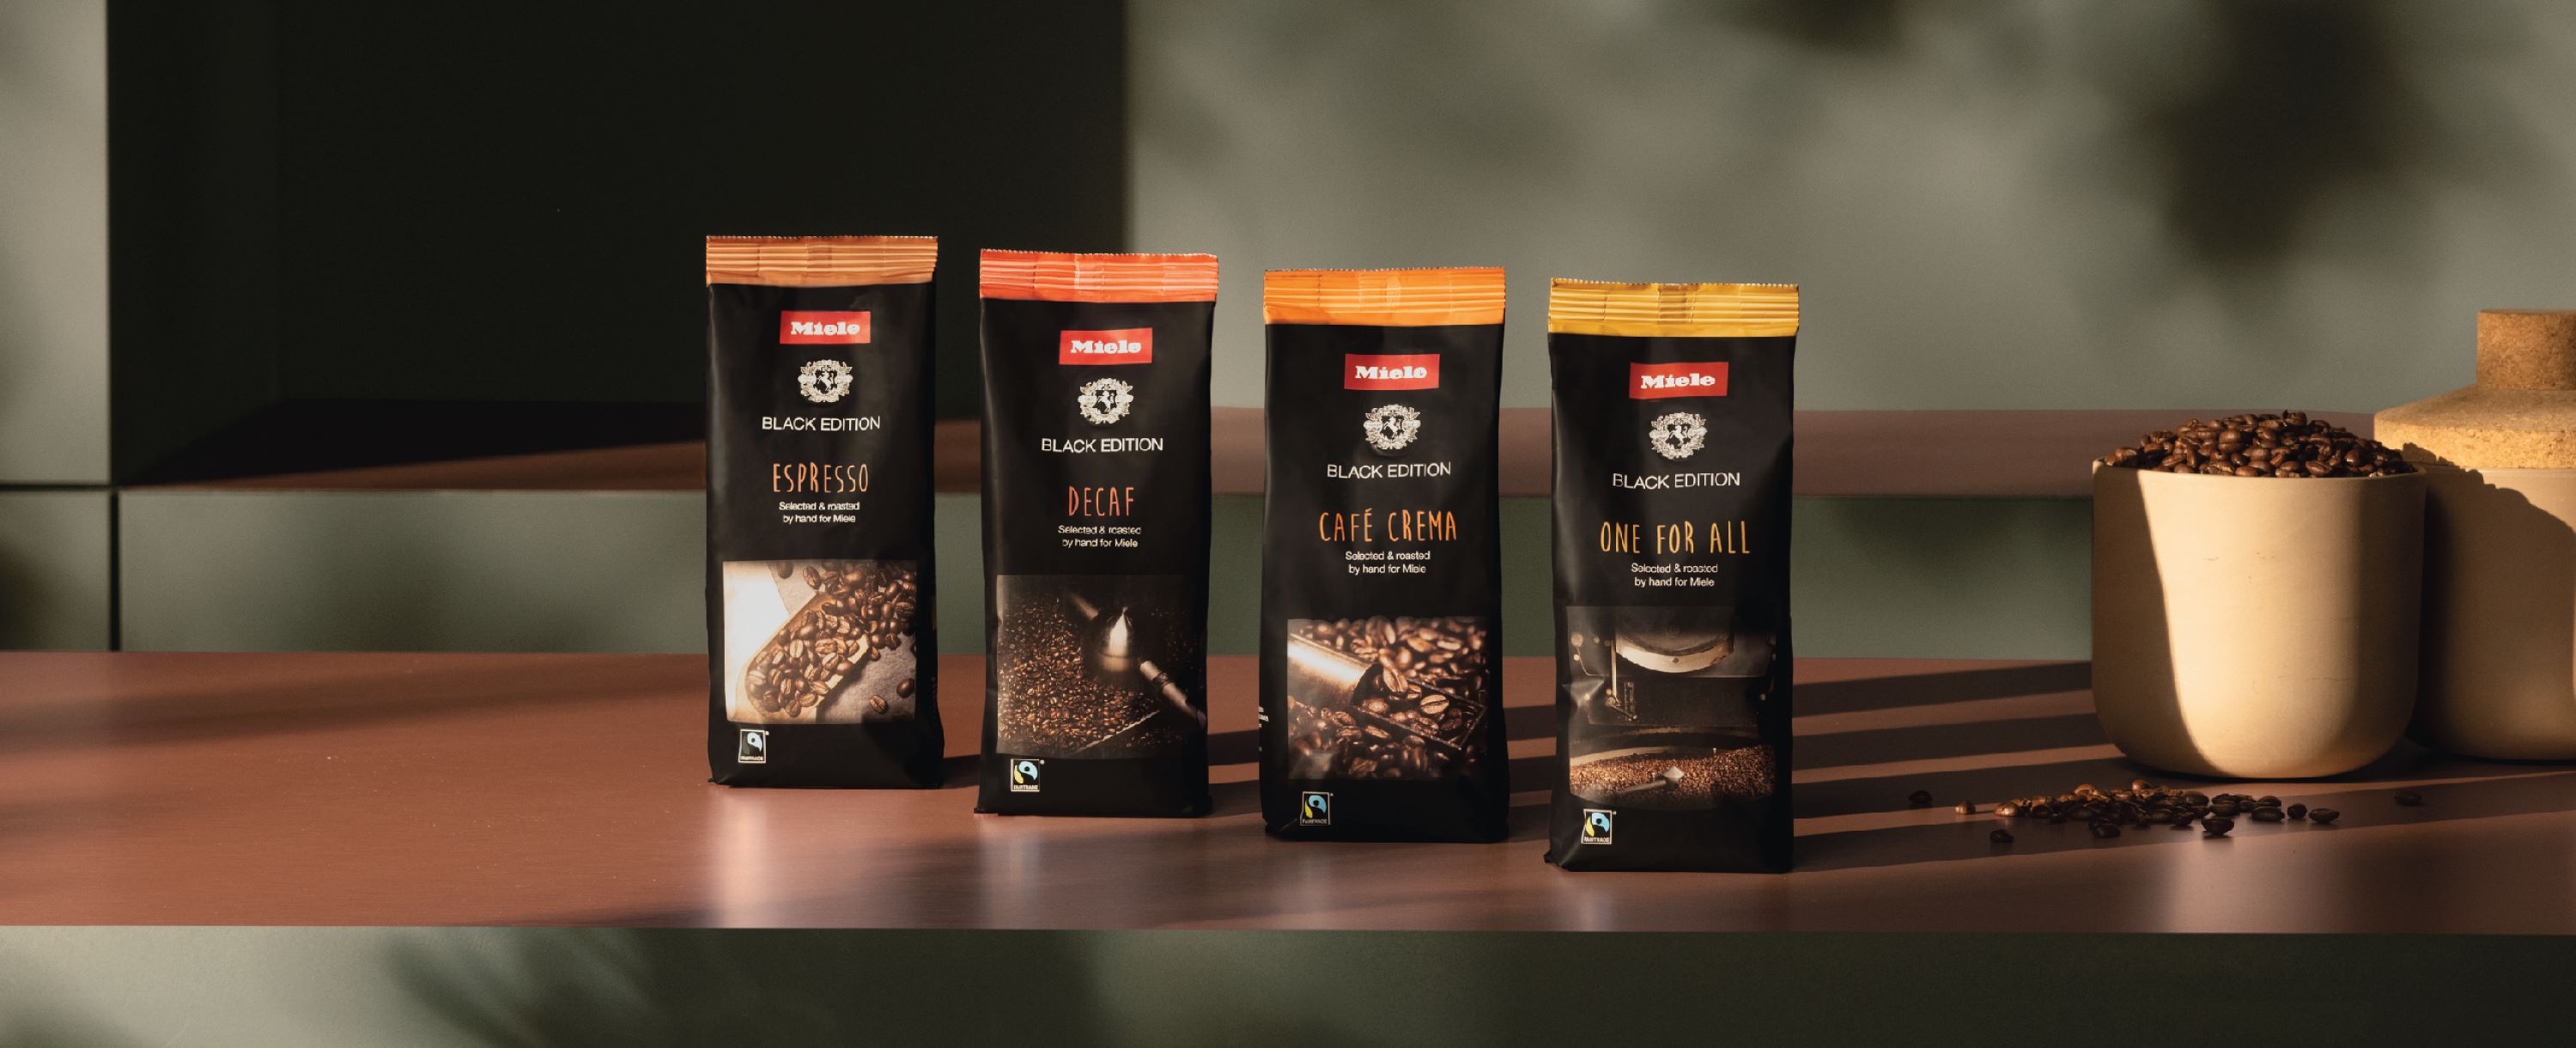 Selection of Miele Coffee Beans